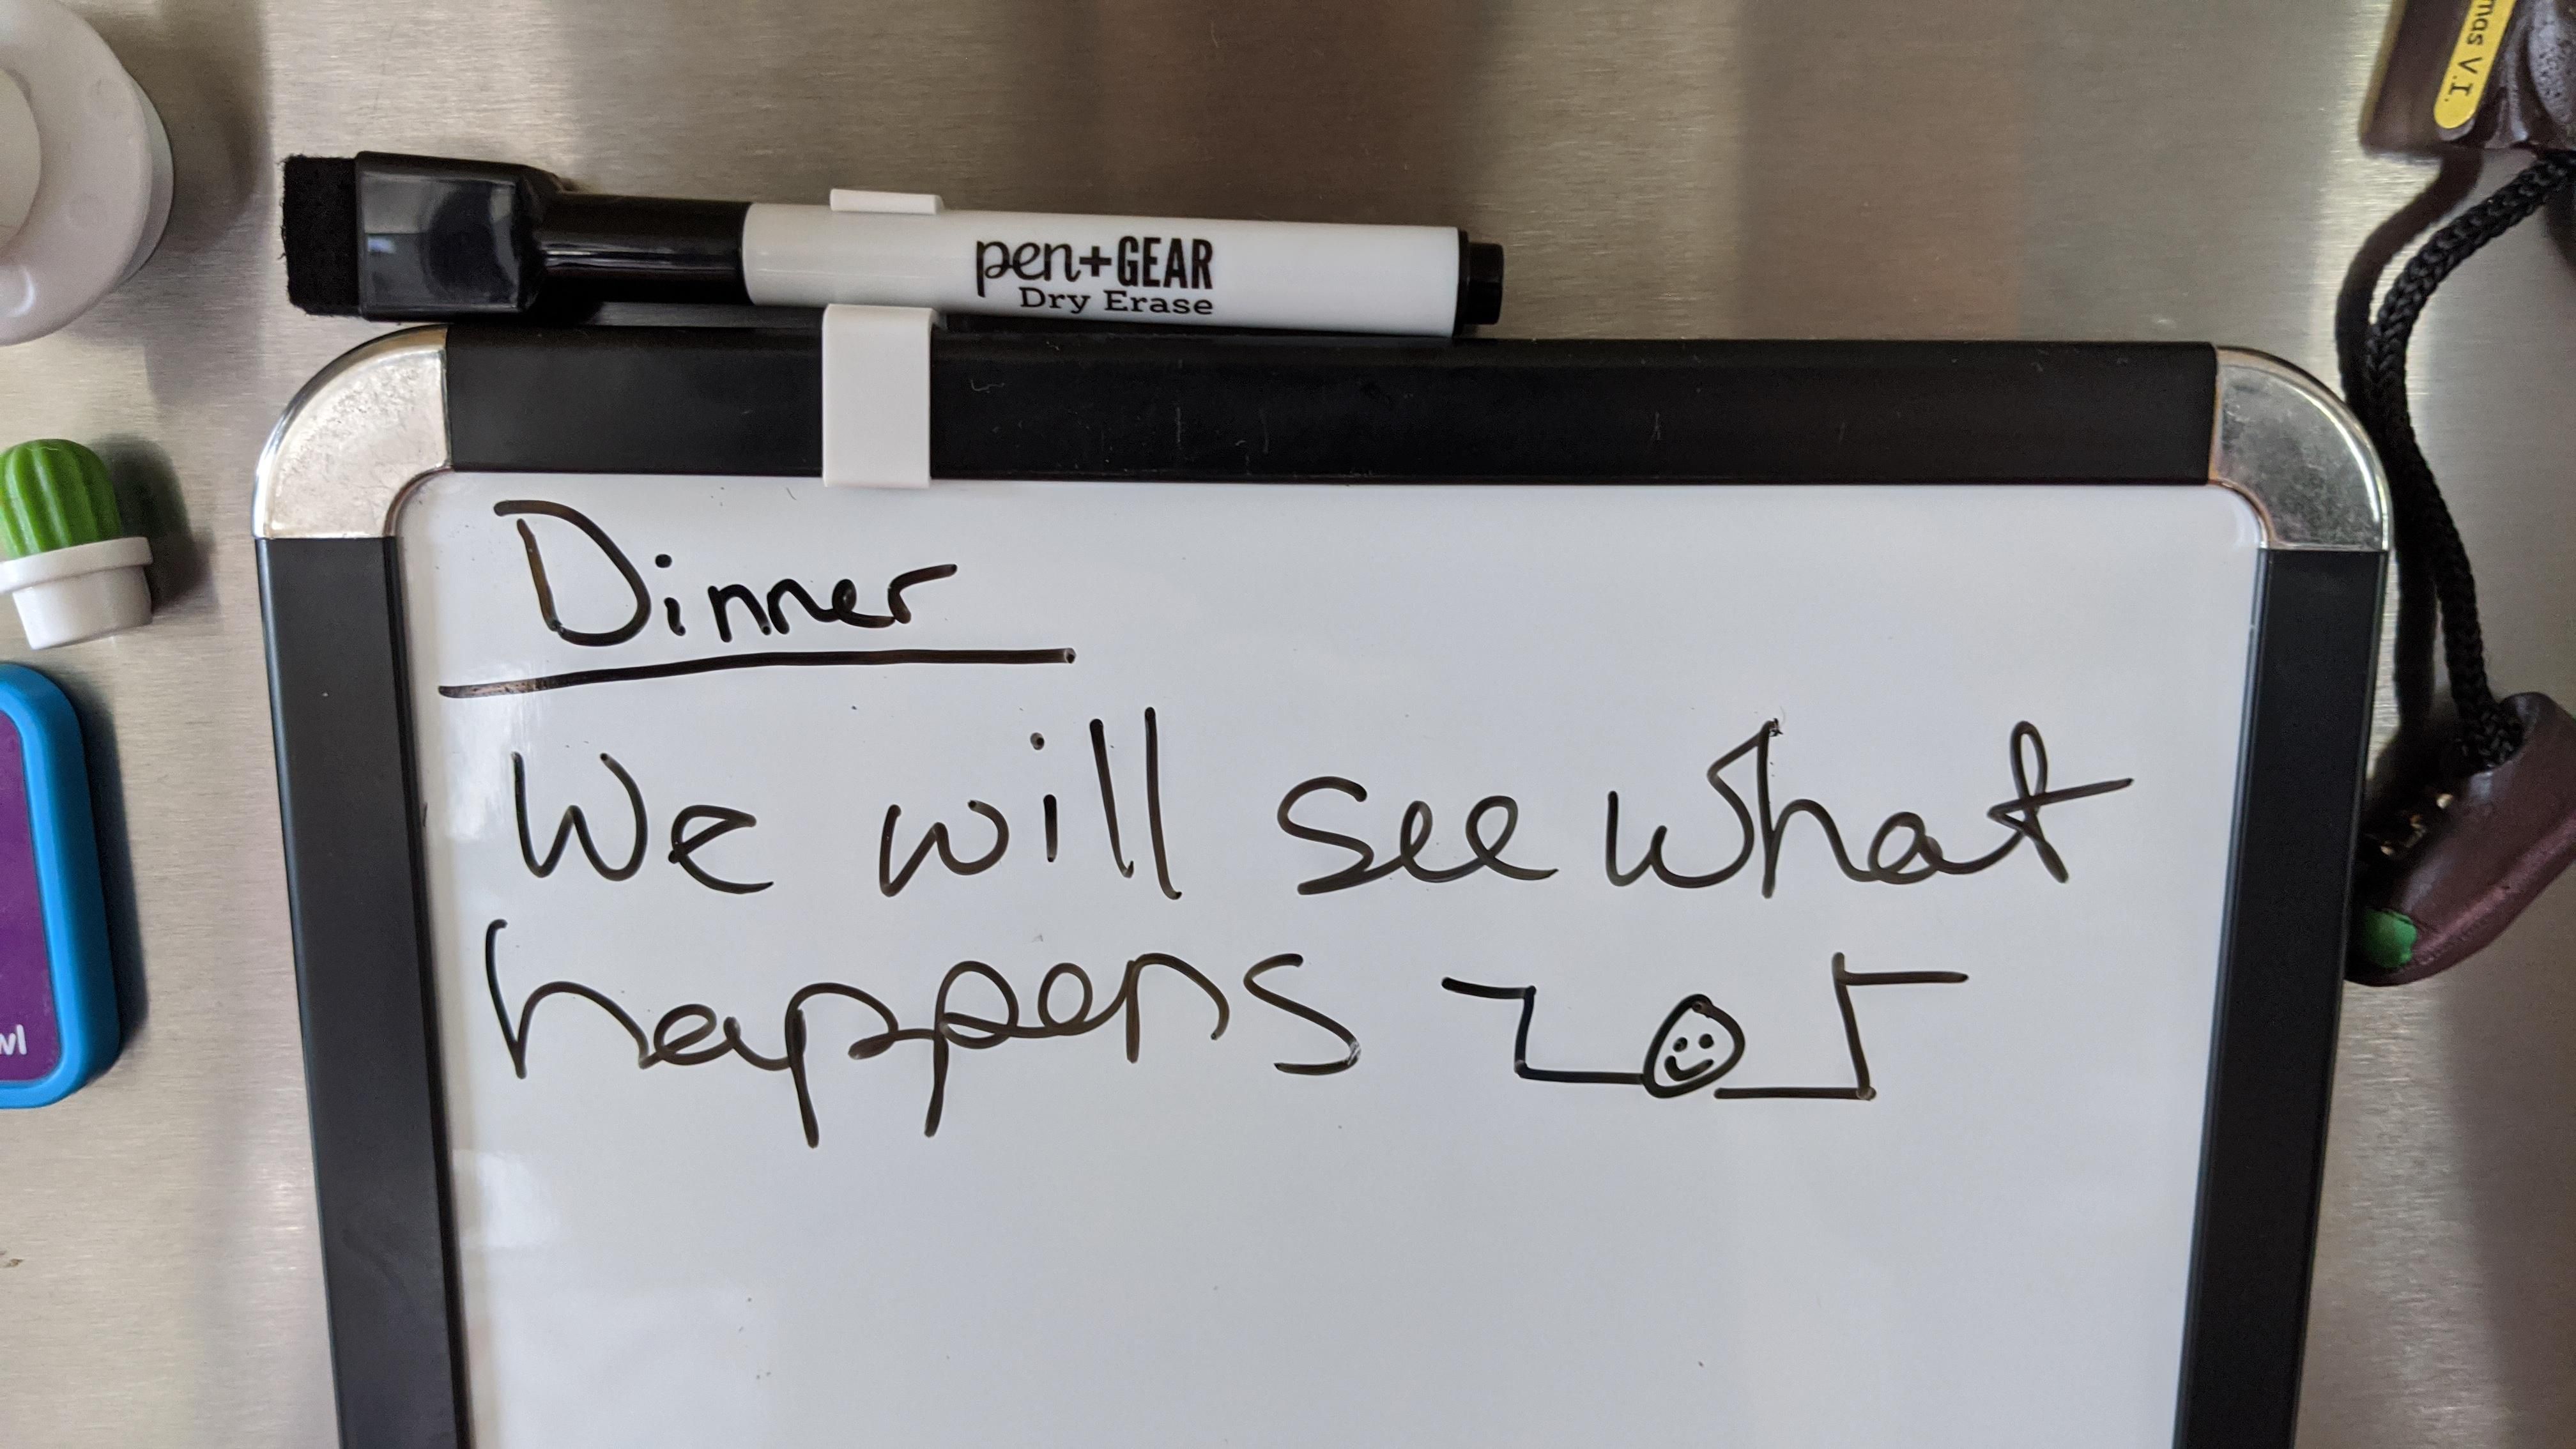 My wife religiously writes down dinner for the week. Guess this week just hit the fan.